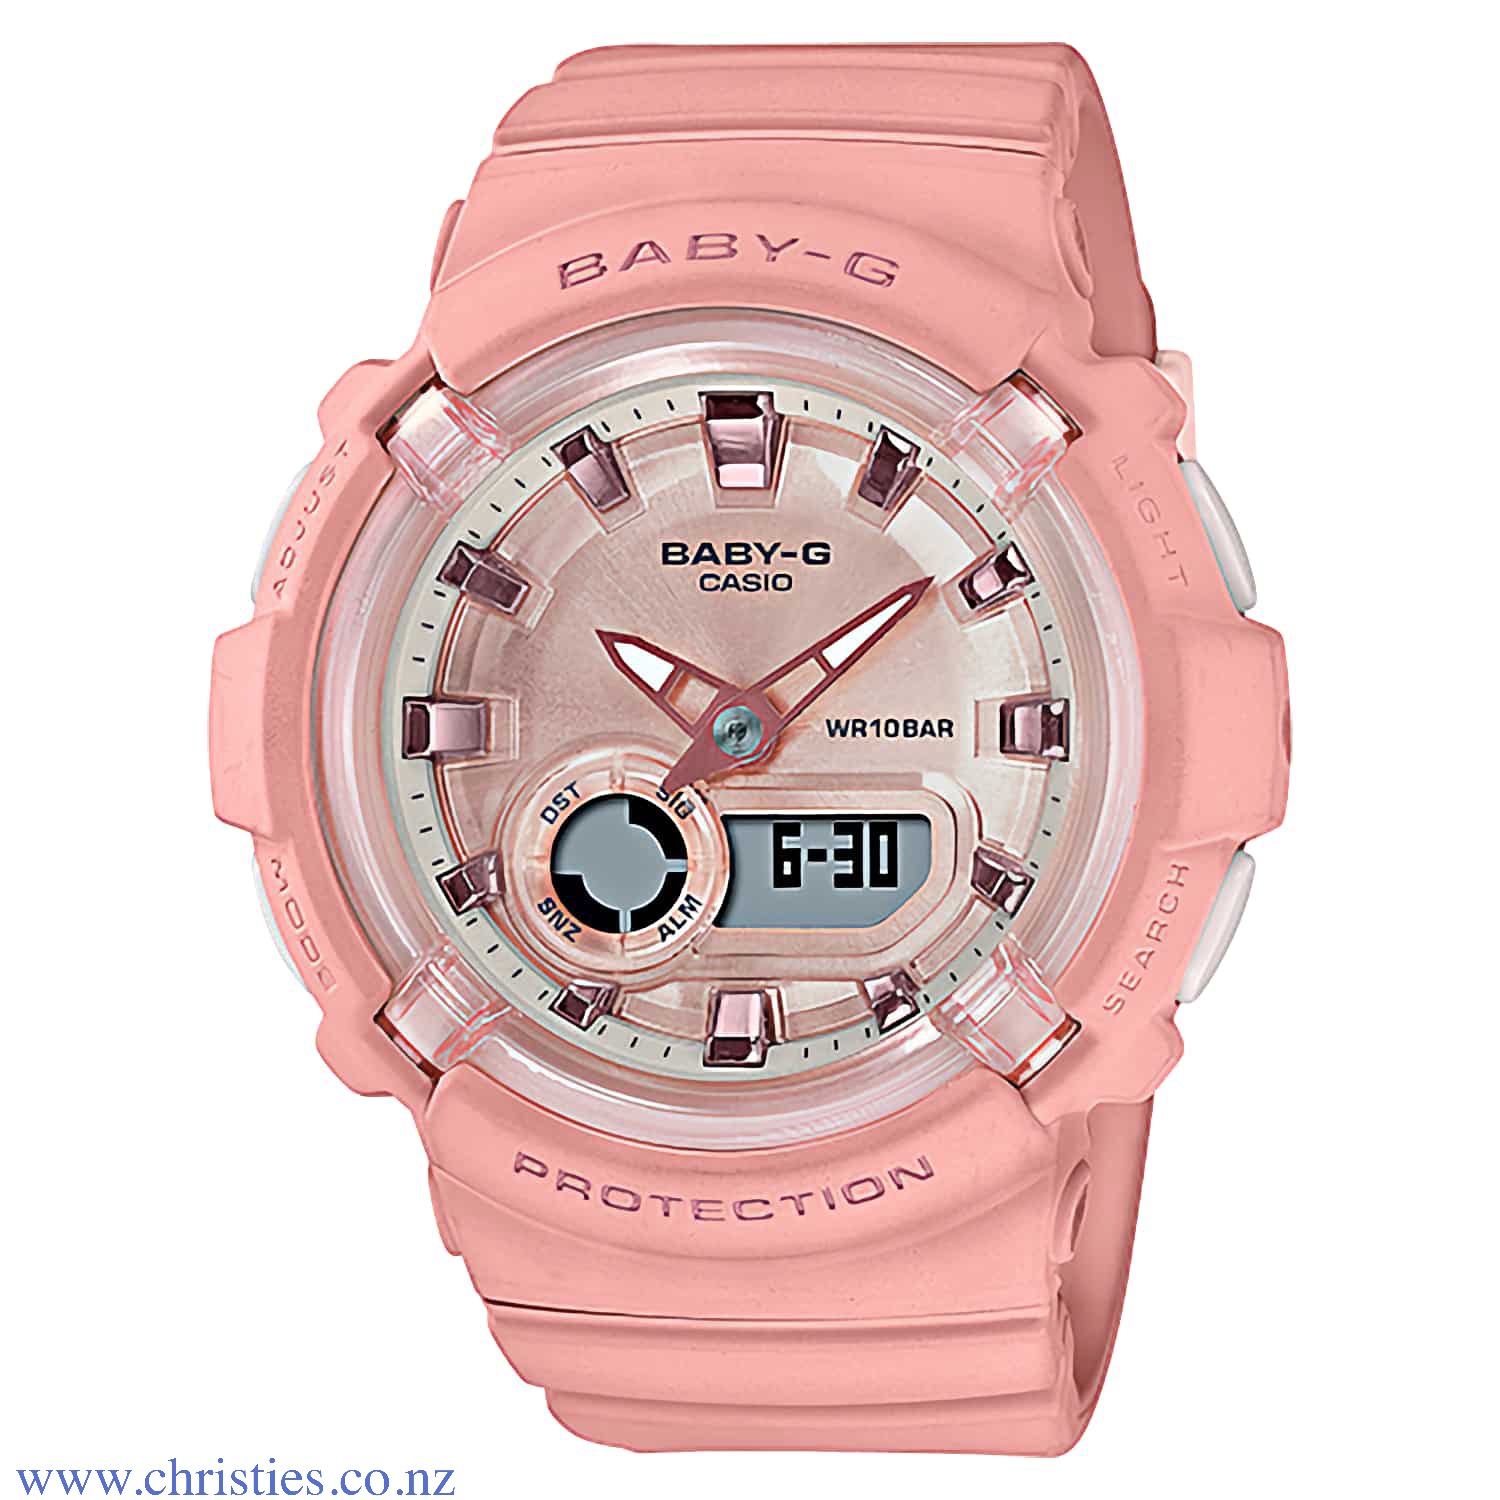 BGA280-4A Casio Baby-G Watch.   The BGA-280 Series layers multiple parts to create innovative and colourful designs. The round cases of these models and the cute impression of their hefty forms are complemented by the sporty touch of the m @christies.onli